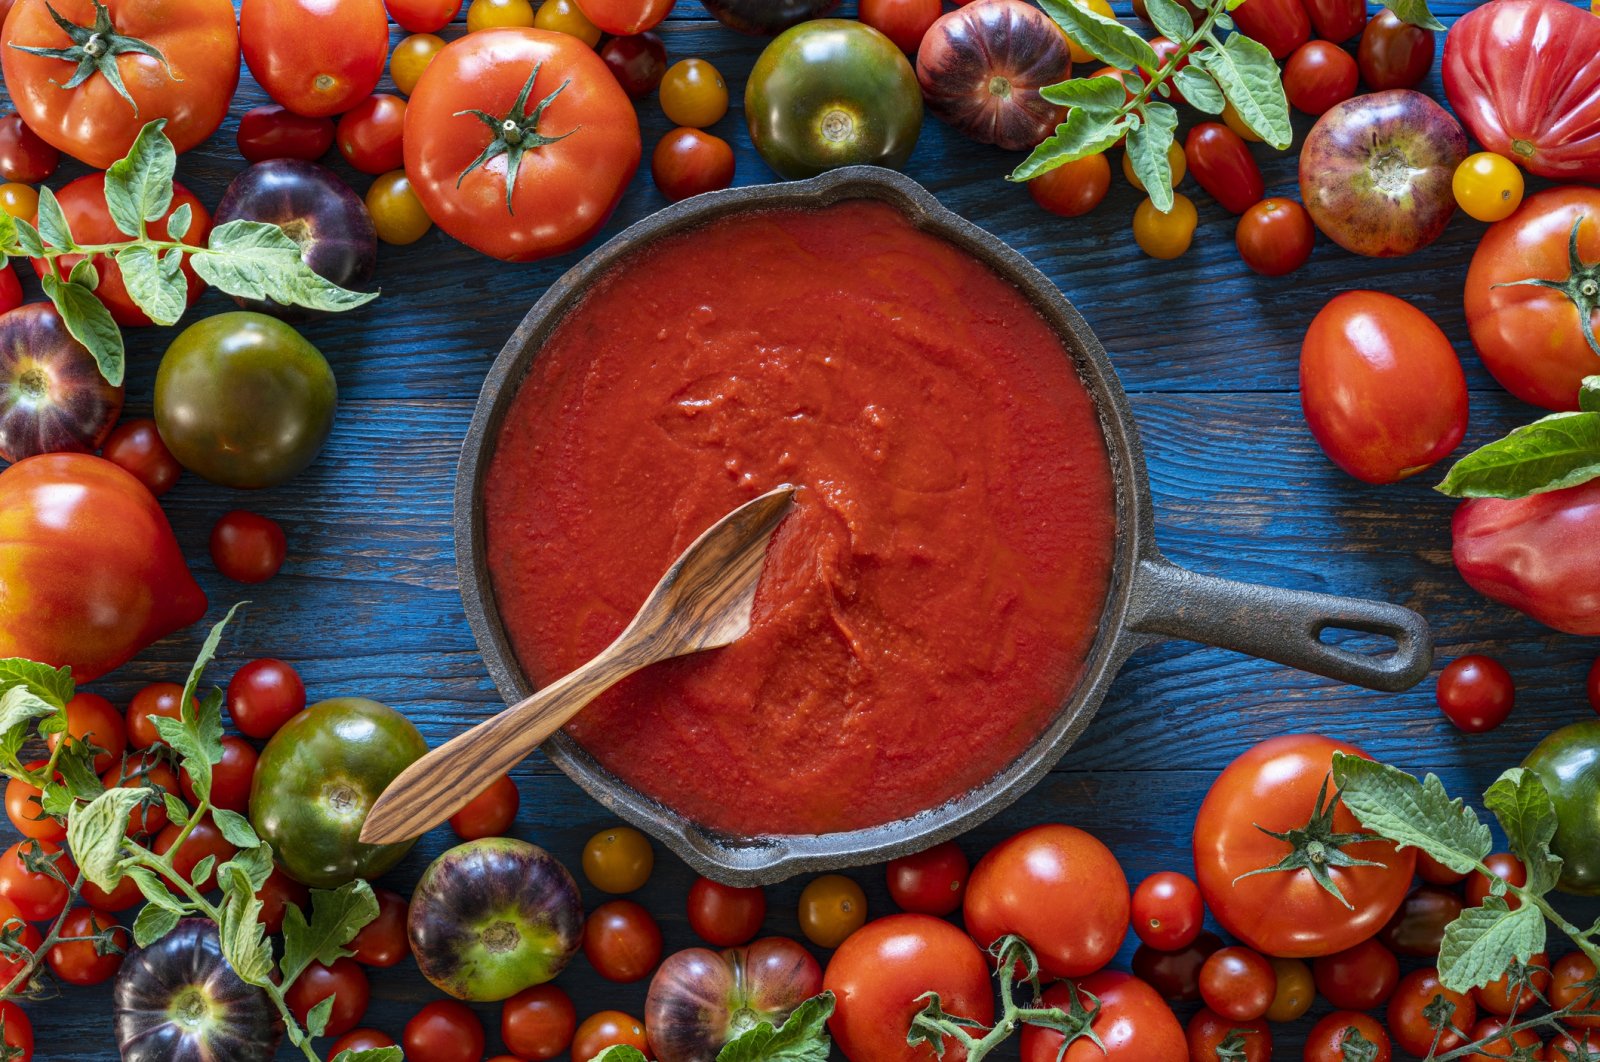 Don't let those fragrant and juicy summer tomatoes go to waste, so get preserving to enjoy them year-round. (iStock Photo)